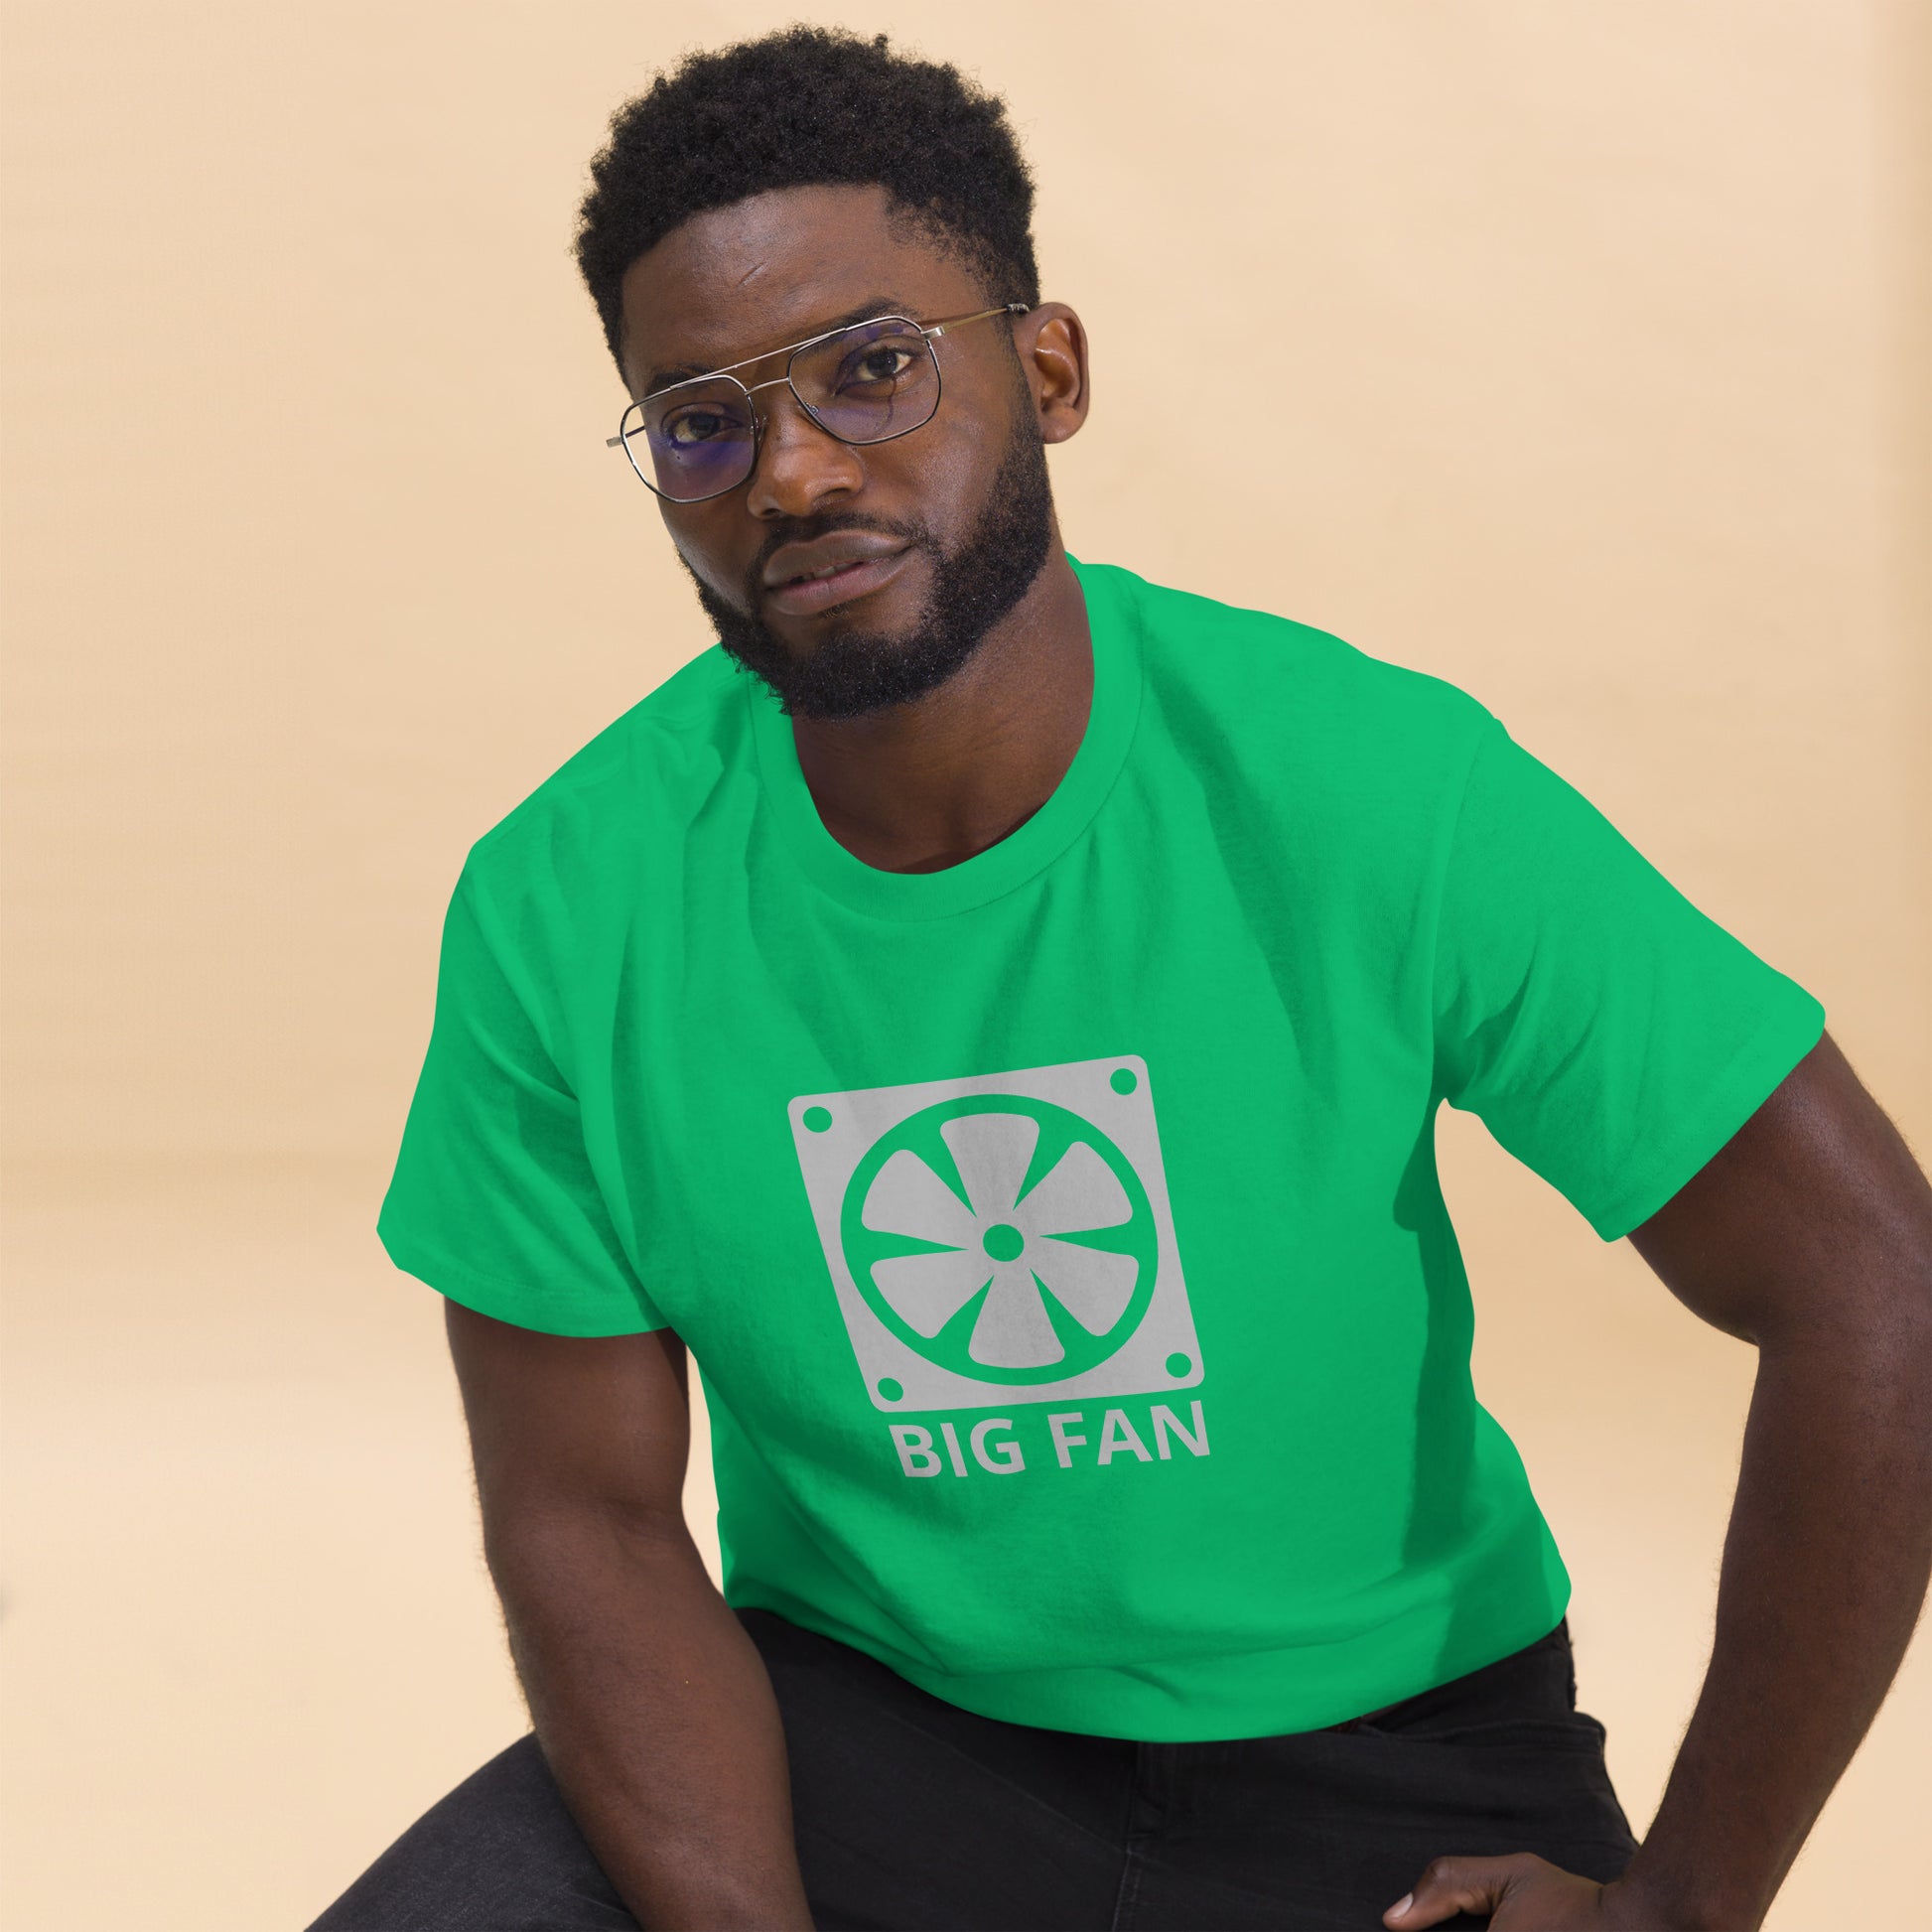 Man with Irish green t-shirt with image of a big computer fan and the text "BIG FAN"